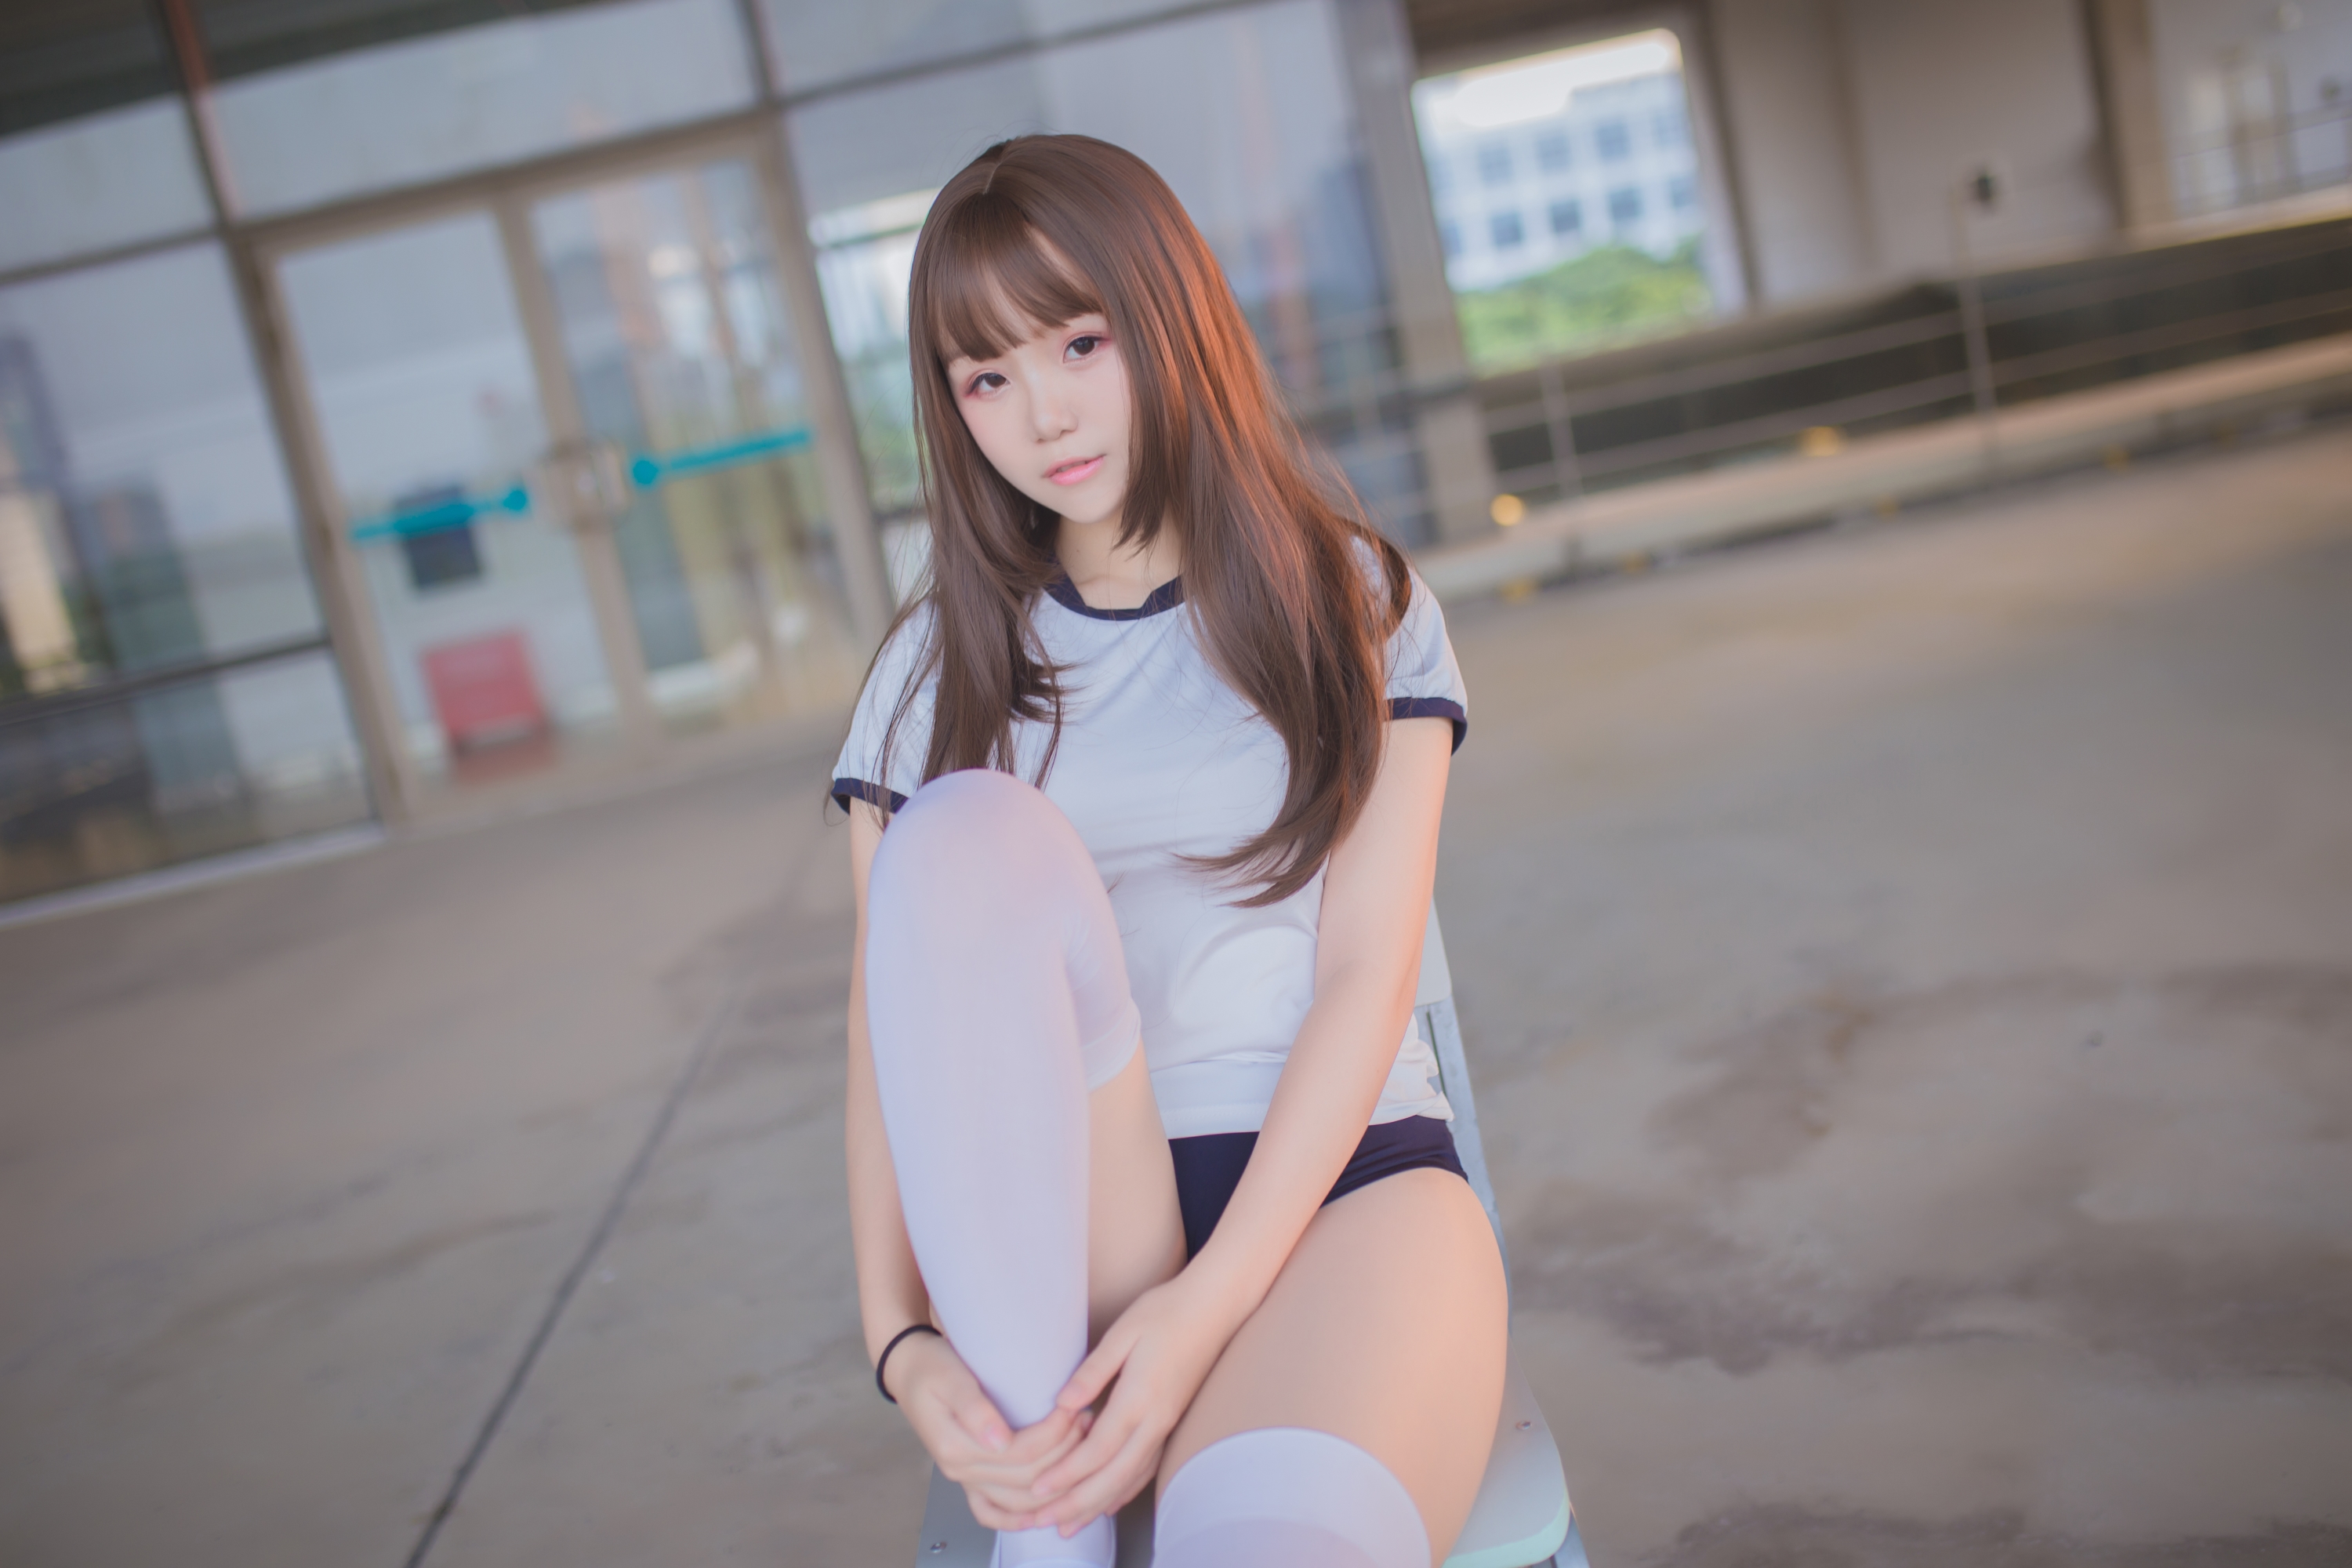 Yoko Cos Women Model Asian Brunette Long Hair Looking At Viewer Cosplay Japanese Women Gym Clothes S 3000x2000